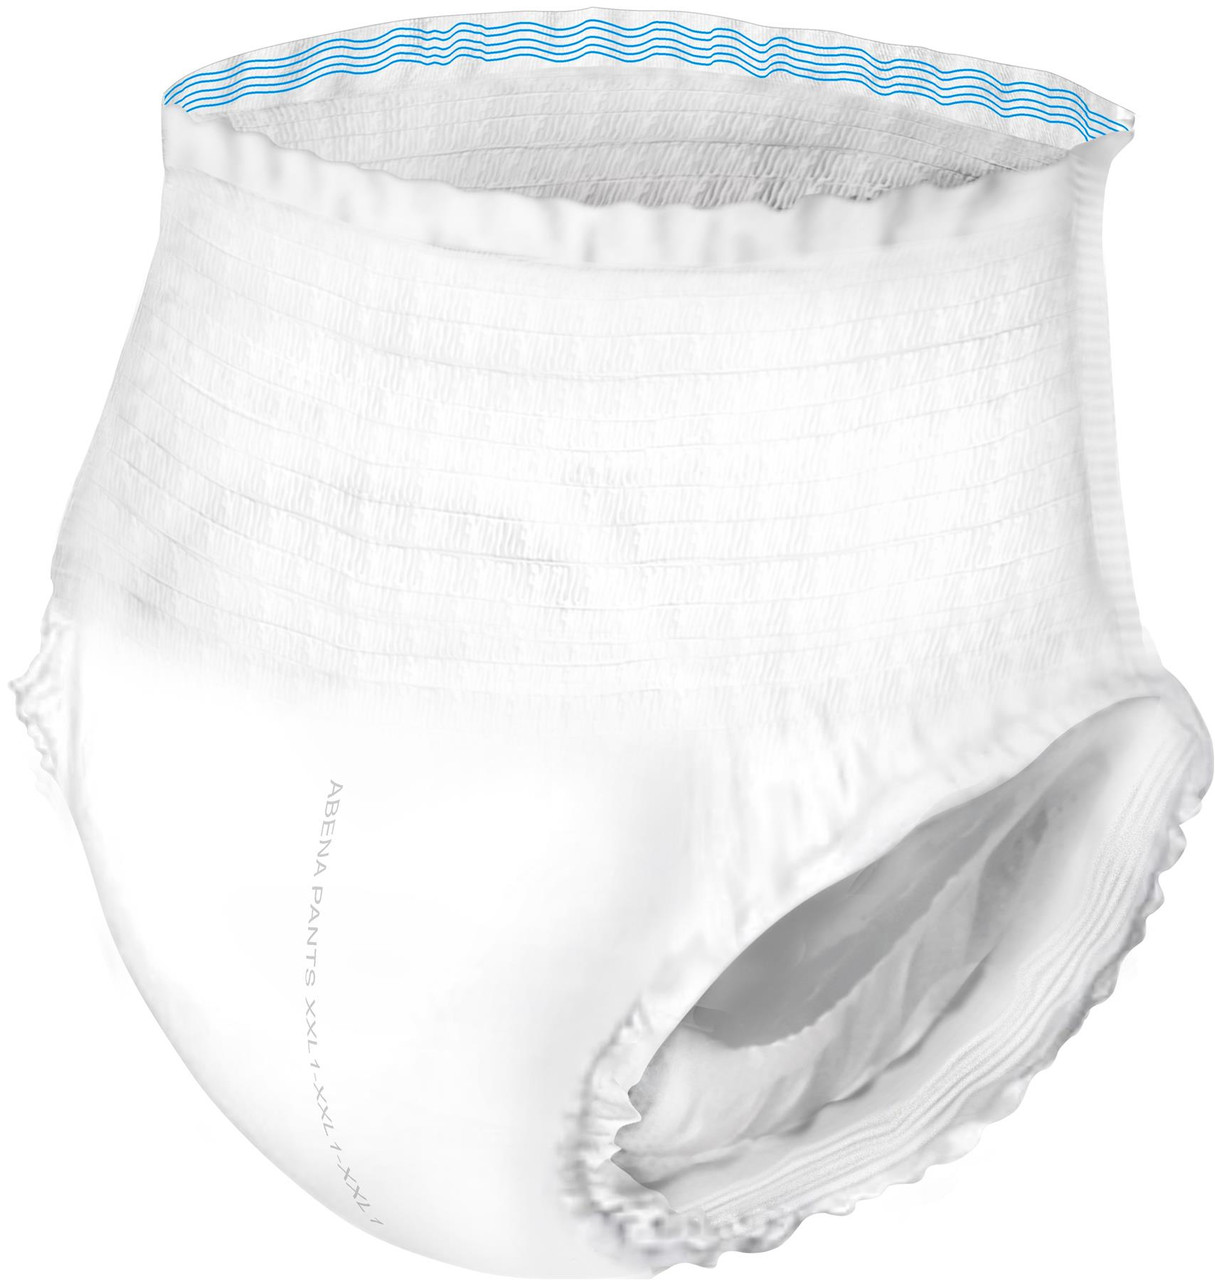 Incontinence Pants Adult Nappies Diaper for Heavy Bladder Weakness Sana  Medium